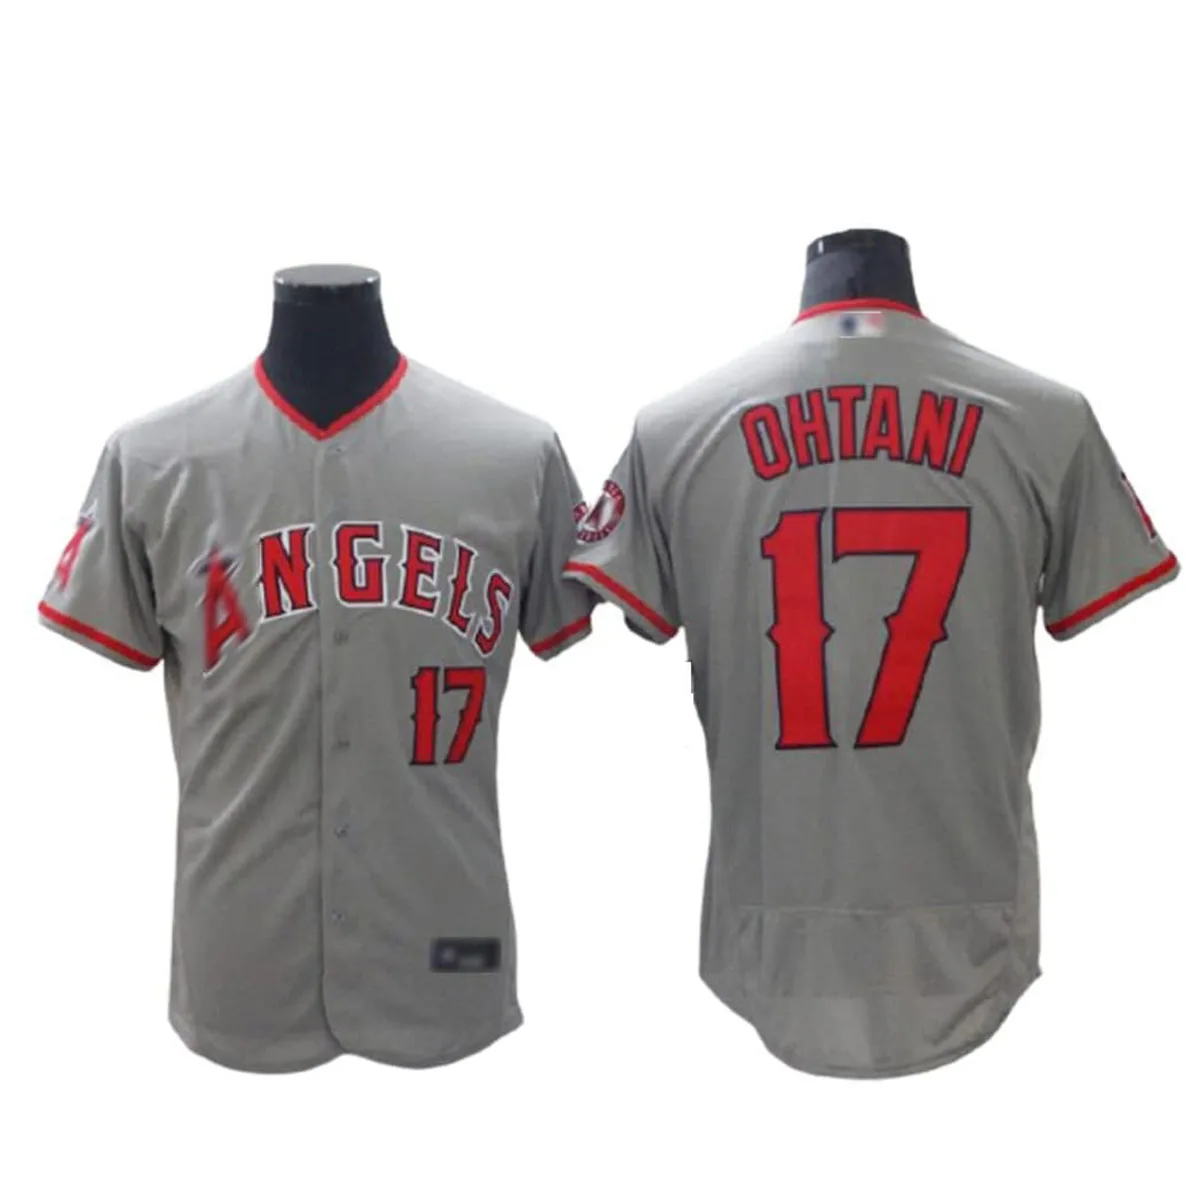 

Shohei Ohtani Los Angeles Angels#17 Baseball Jersey Unisex Short Sleeve T-shirt Player Summer Clothes Cardigan Embroidered plain